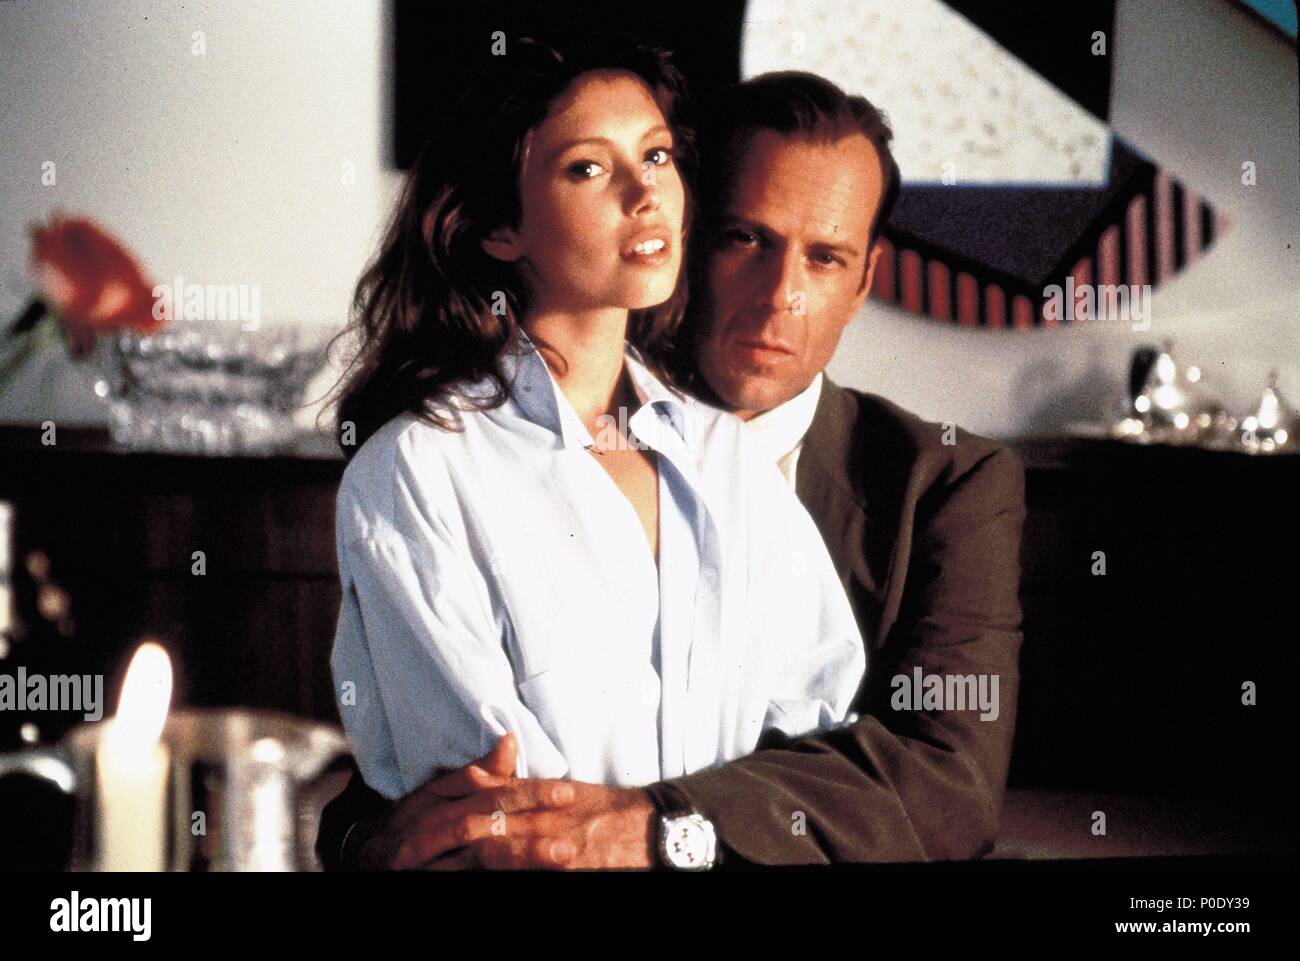 Original Film Title: COLOR OF NIGHT.  English Title: COLOR OF NIGHT.  Film Director: RICHARD RUSH.  Year: 1994.  Stars: BRUCE WILLIS; JANE MARCH. Credit: HOLLYWOOD PICTURES / Album Stock Photo